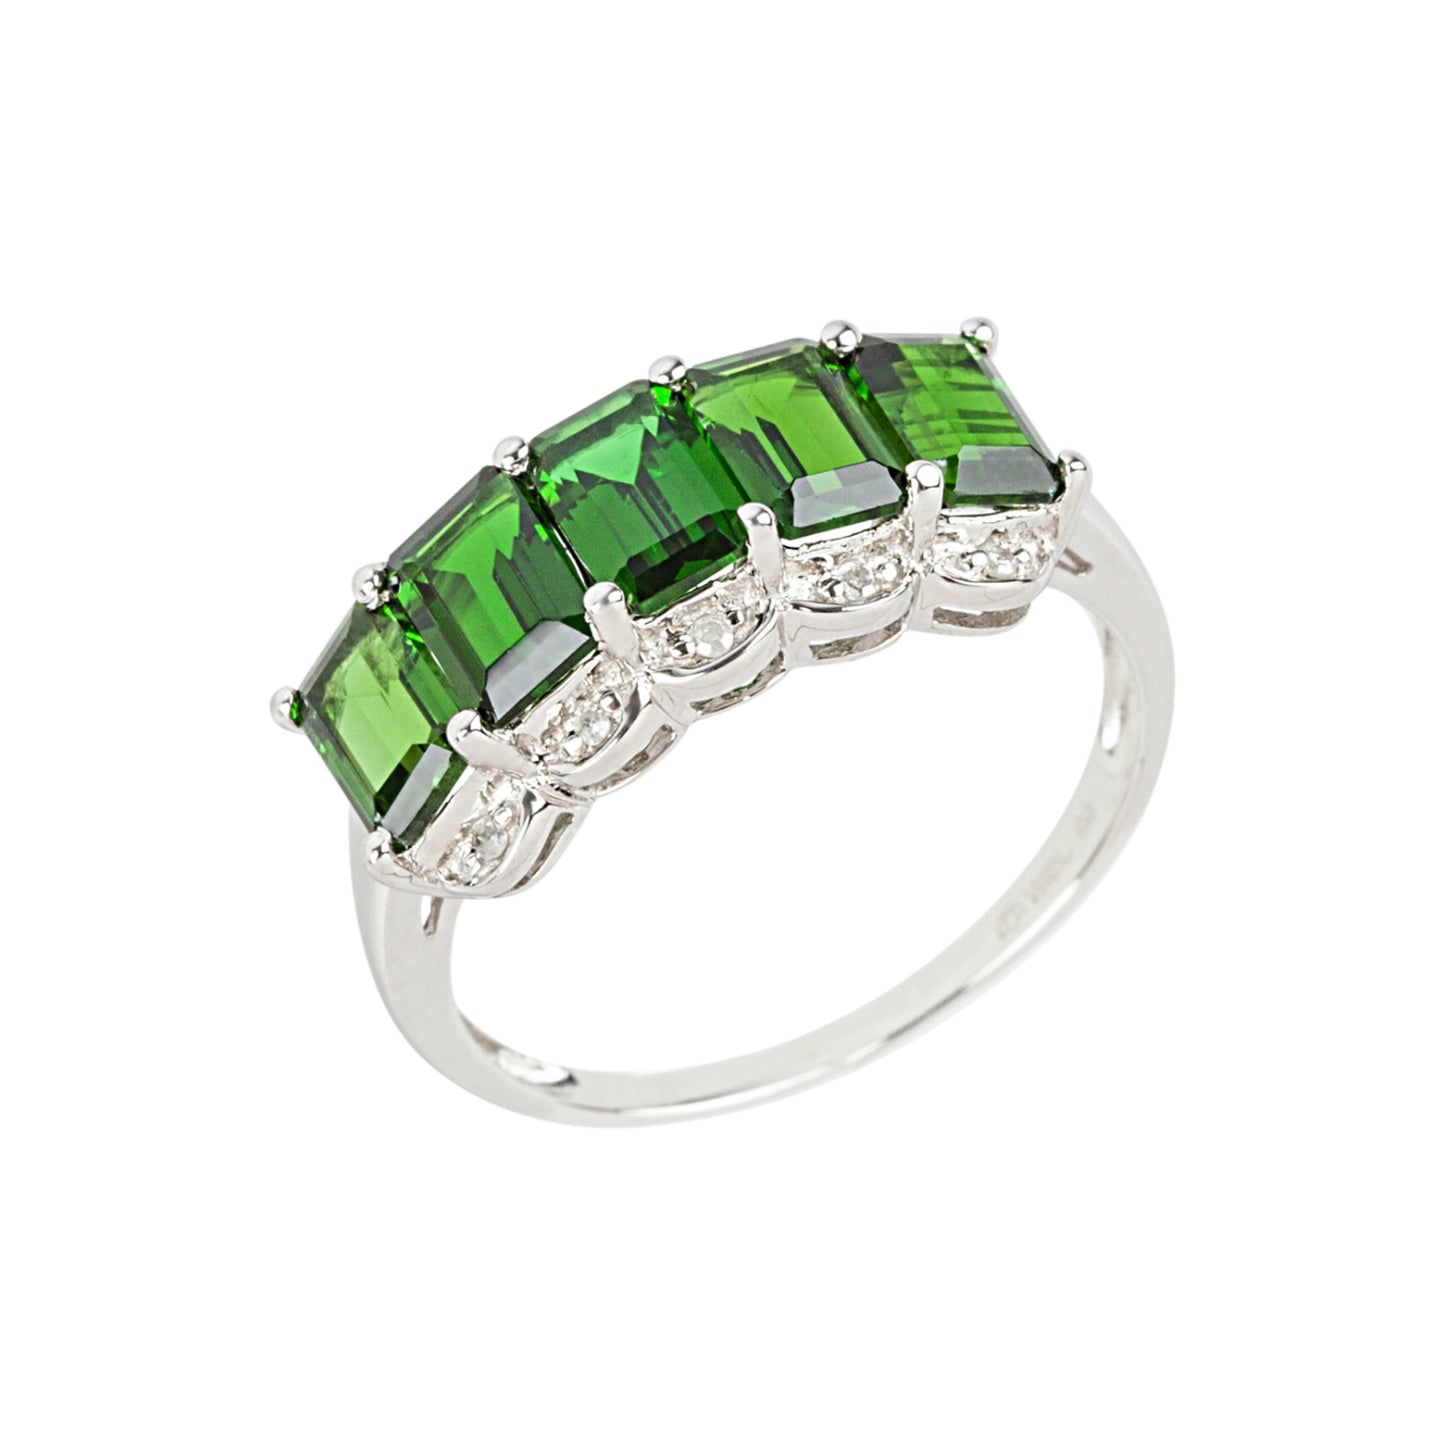 Pinctore Sterling Silver 3.05ctw Chrome Diopside & Diamond Ring - pinctore